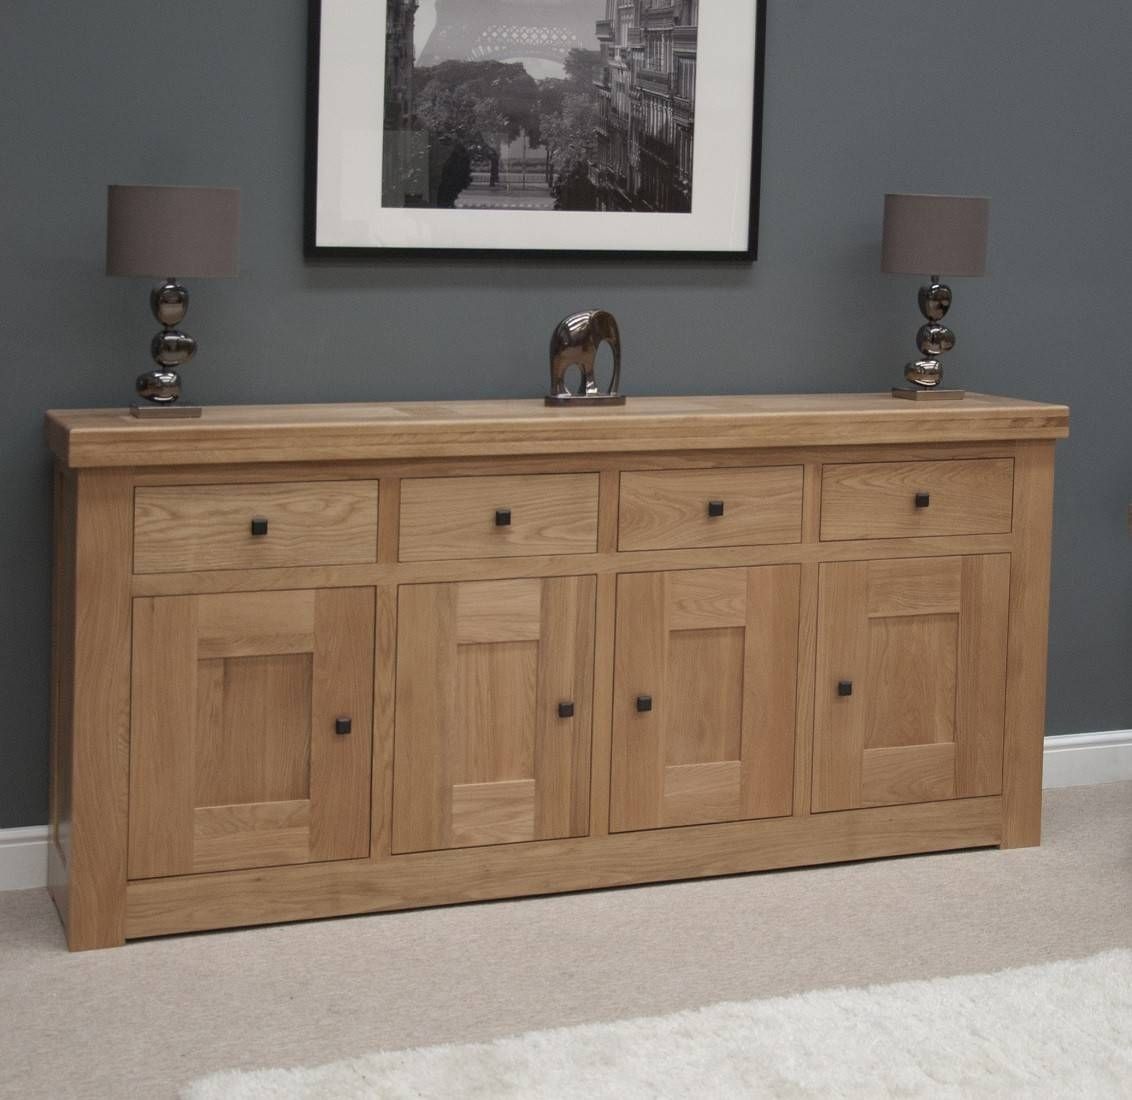 French Bordeaux Oak Extra Large 4 Door Sideboard | Oak Furniture Uk In Best And Newest Wooden Sideboard Furniture (View 3 of 15)